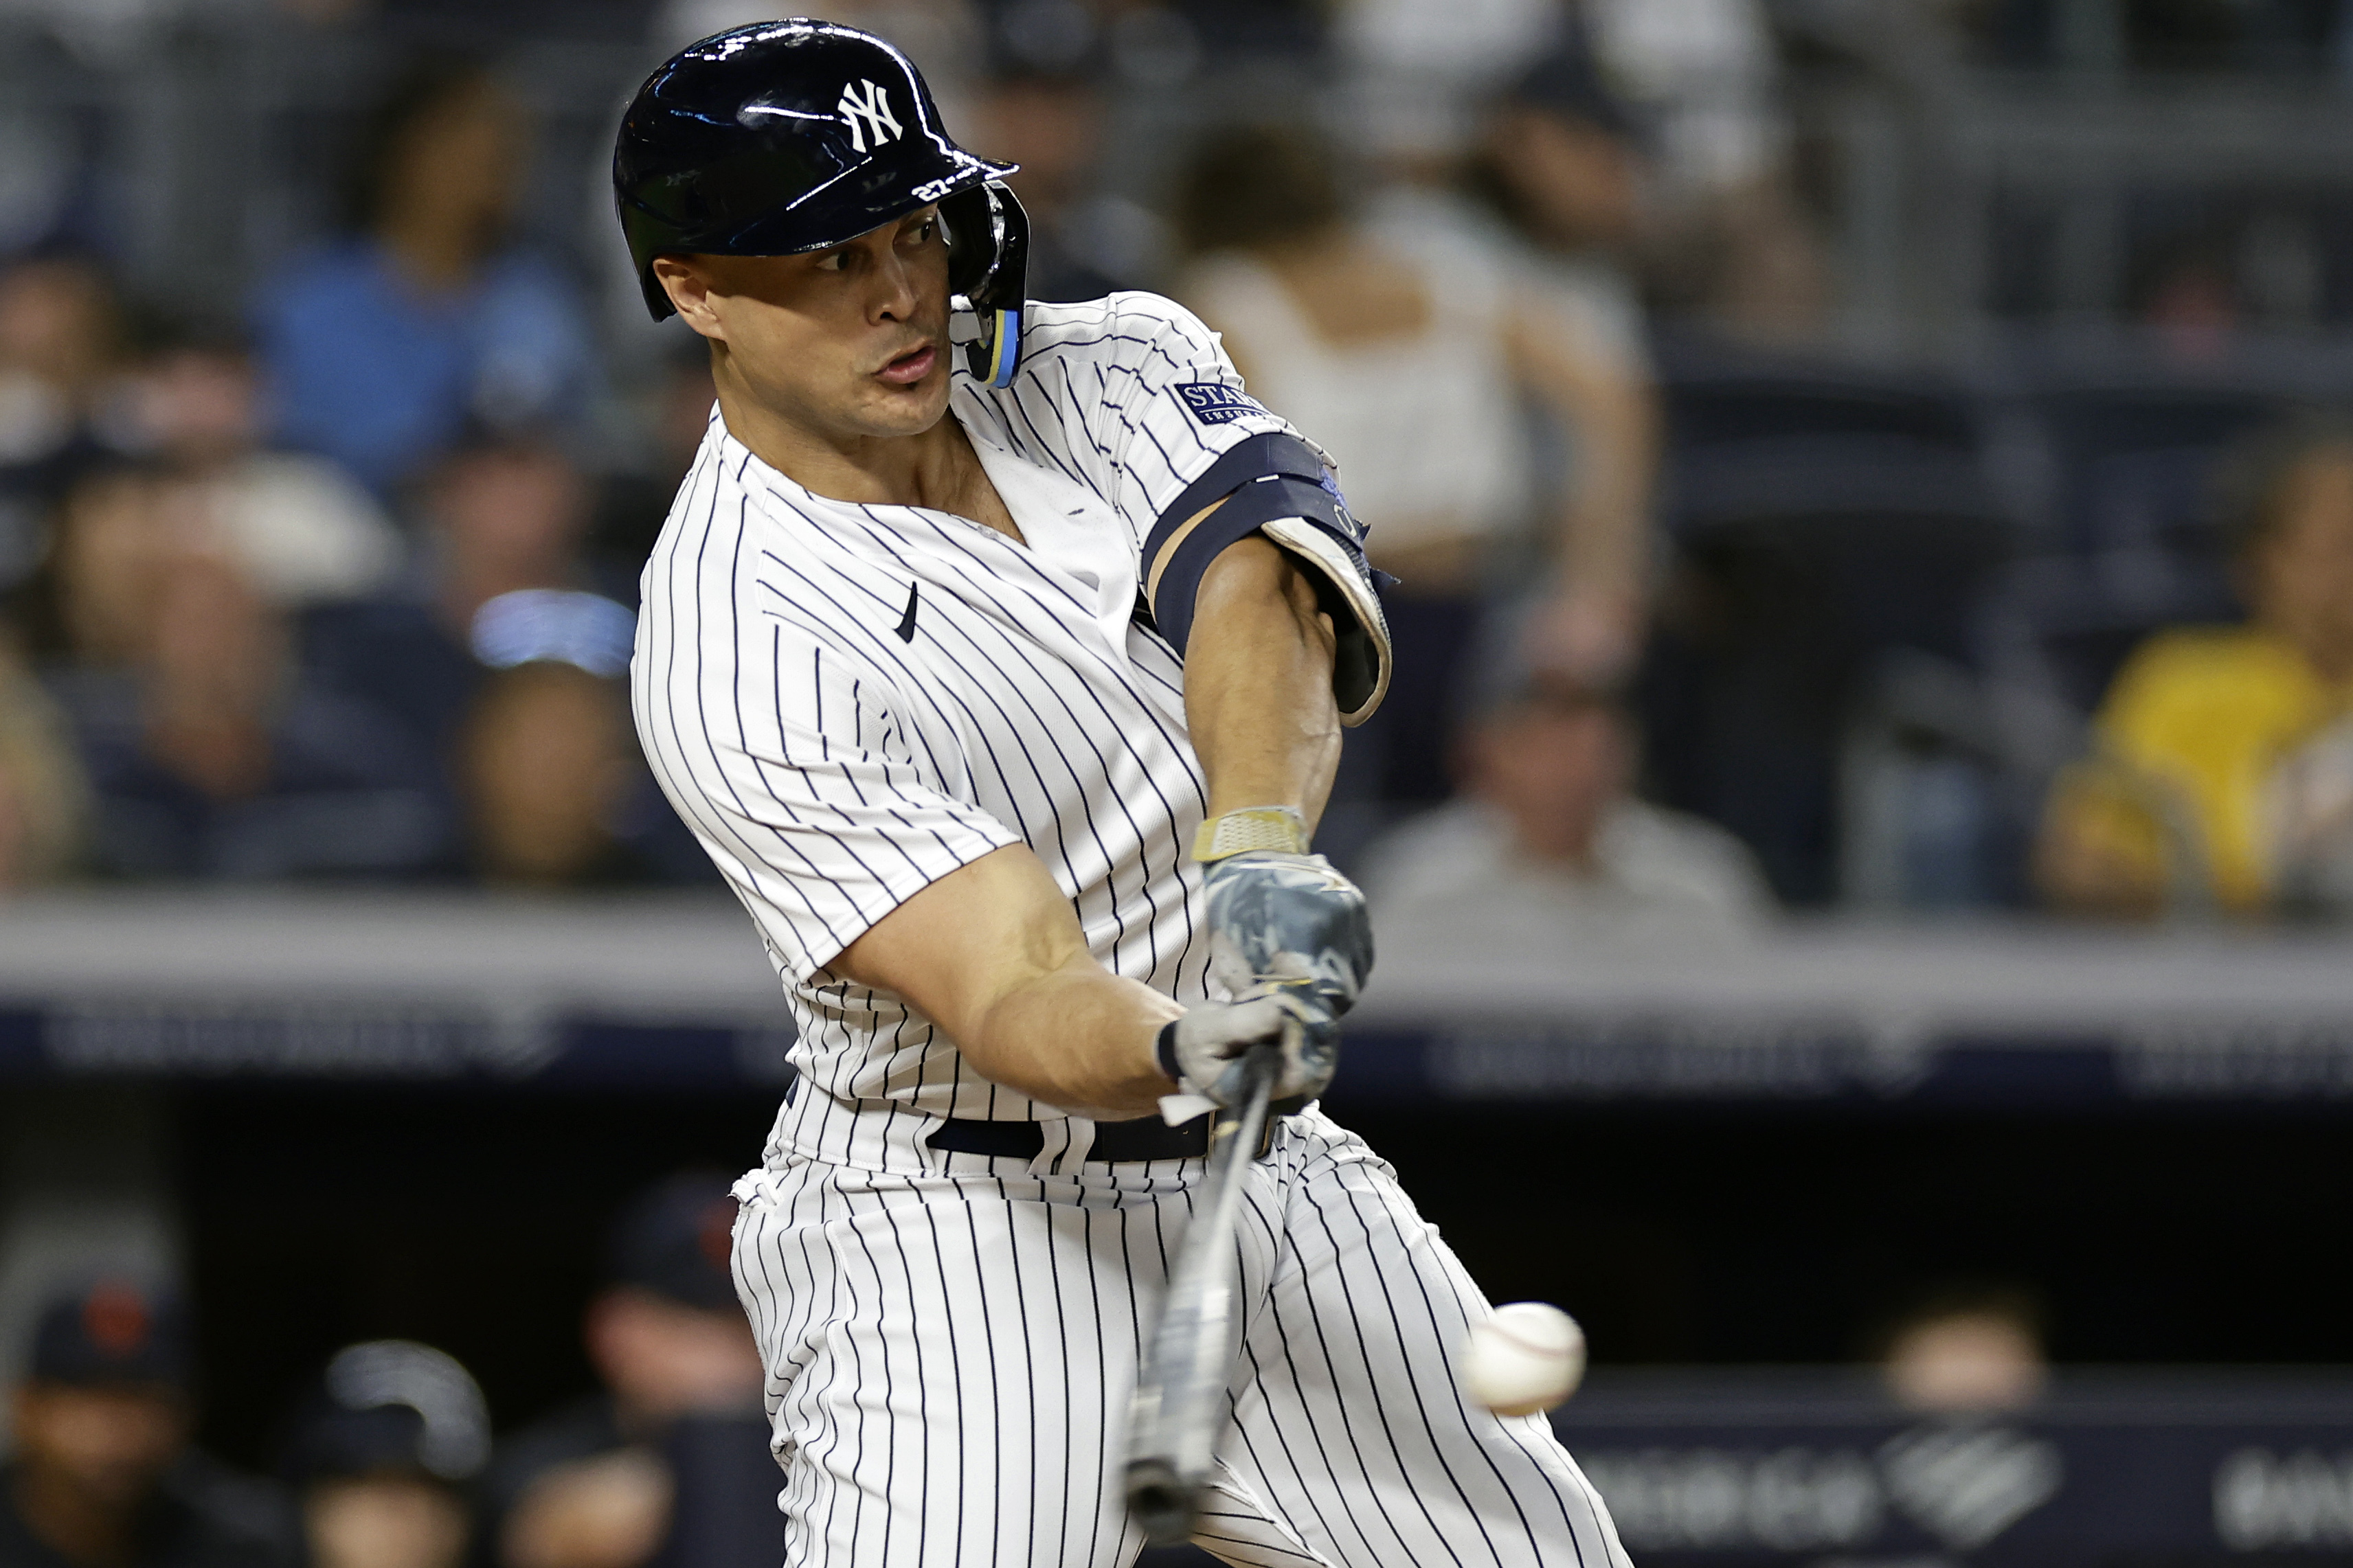 Yankees 1B Rizzo on IL due to post-concussion syndrome from